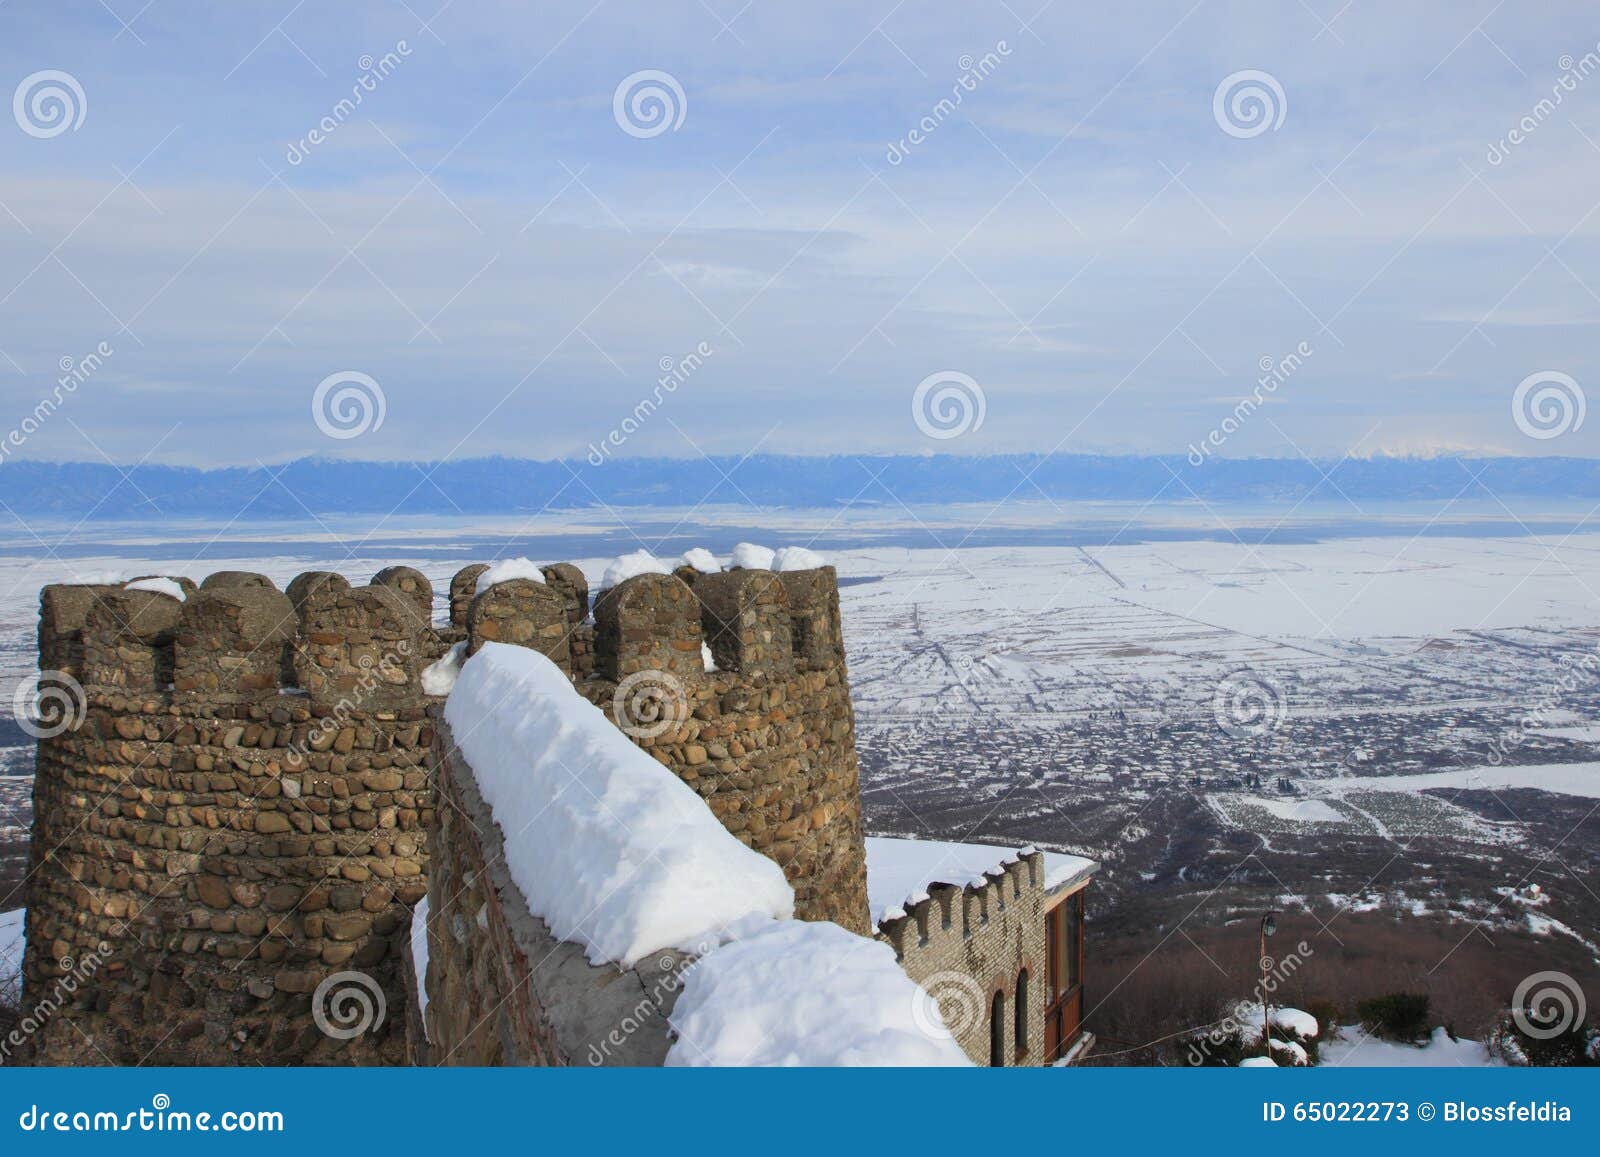 the wall and the tower of castle in sighnaghi town in winter